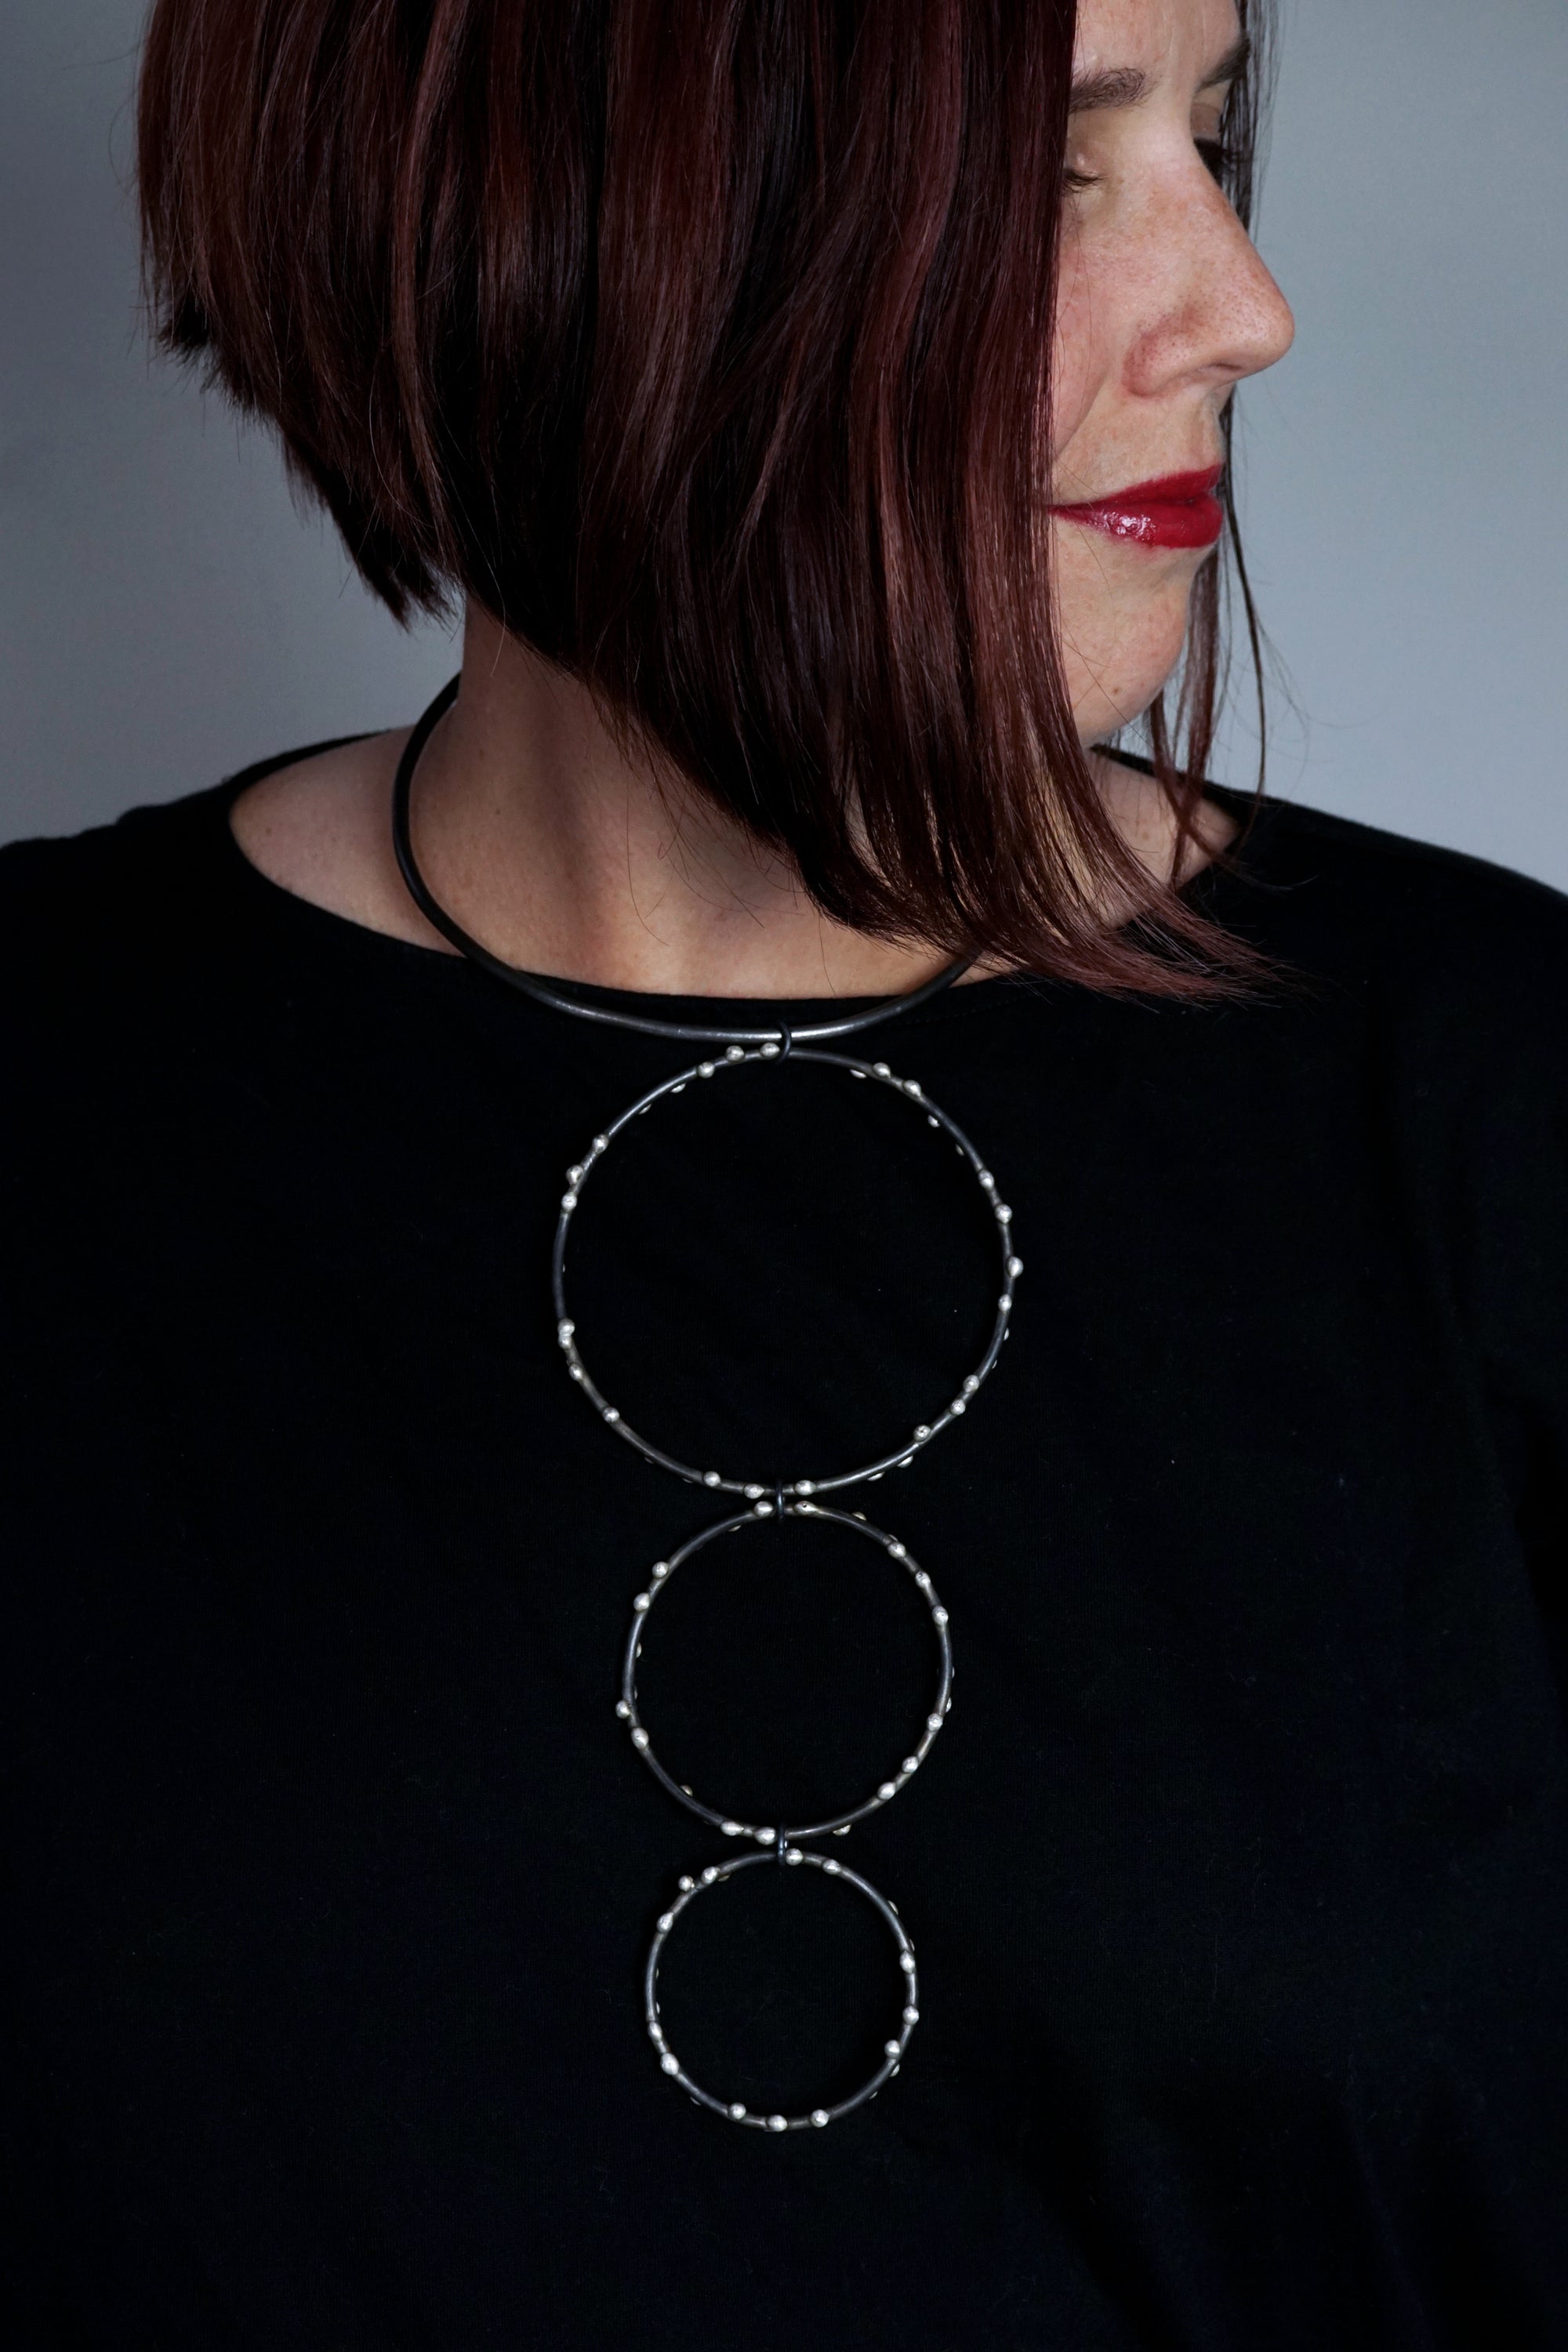 Bold DeFeo Collar Necklace - Silver on Steel